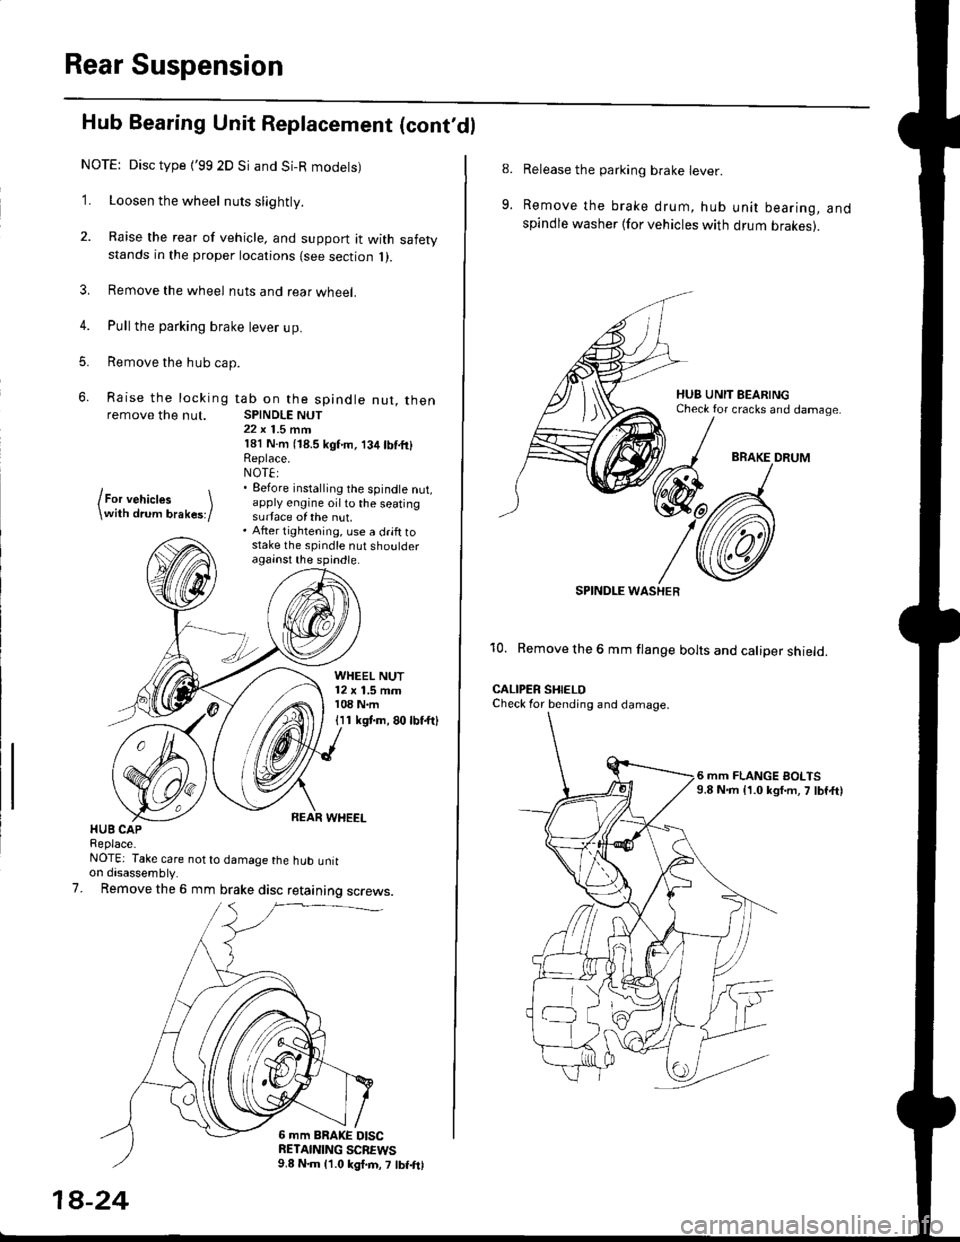 HONDA CIVIC 1999 6.G Workshop Manual Rear Suspension
Hub Bearing Unit Replacement (contdl
NOTE: Disc type {99 2D Si and Si-R modets)
1. Loosen the wheel nuts slightly.
2. Raise the rear of vehicle, and support it with safetystands in t